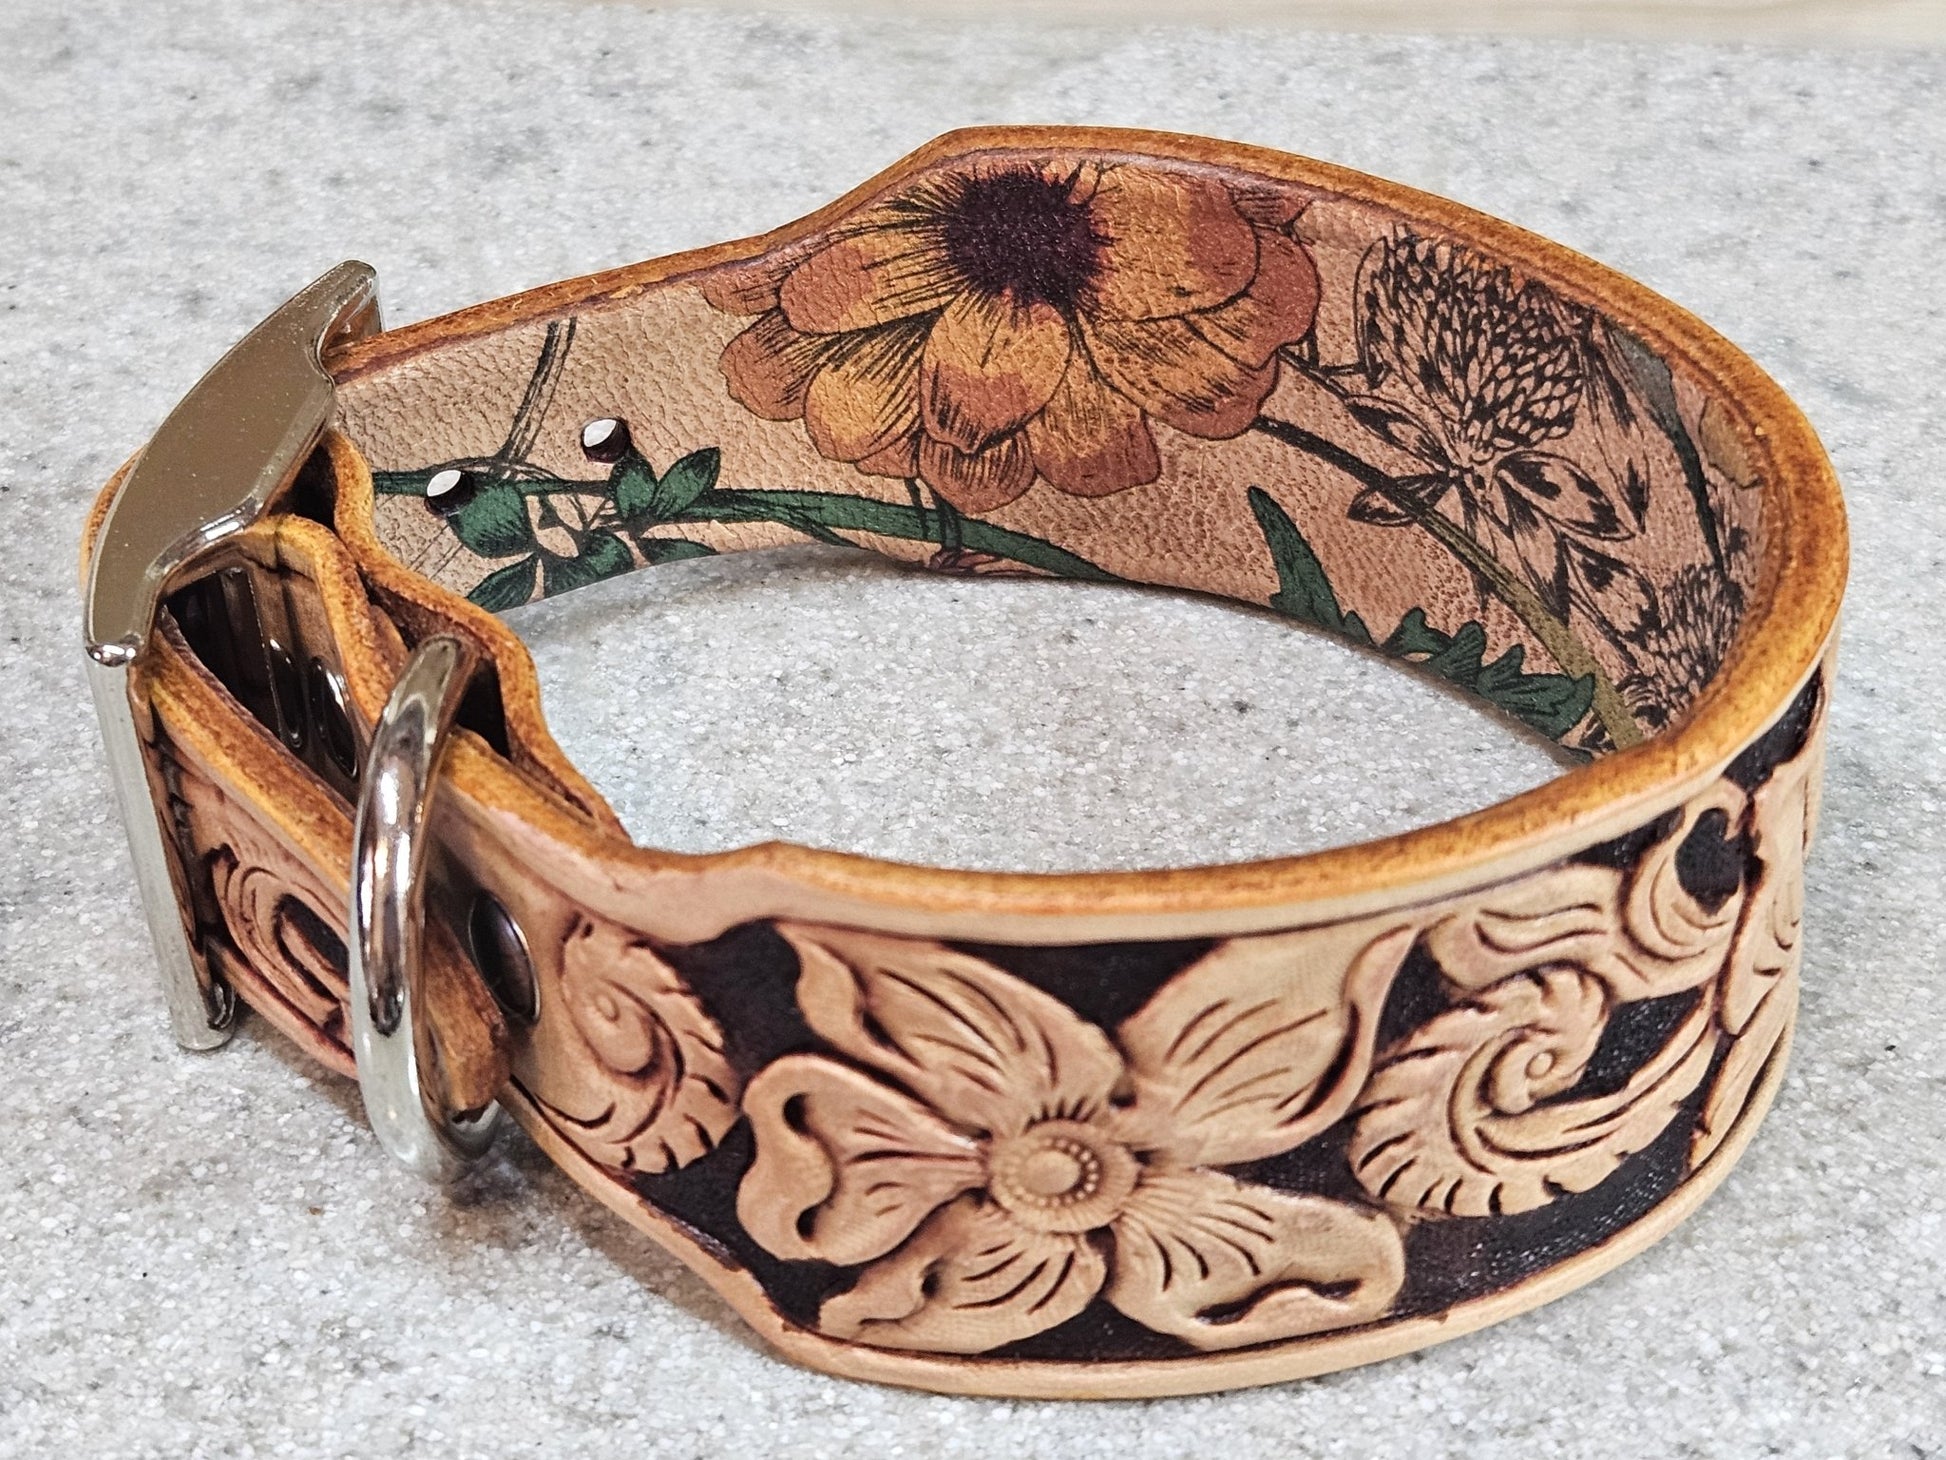 10.5" to 12.5" Genuine Leather Collar - Hand Tooled - Champion Show Leads